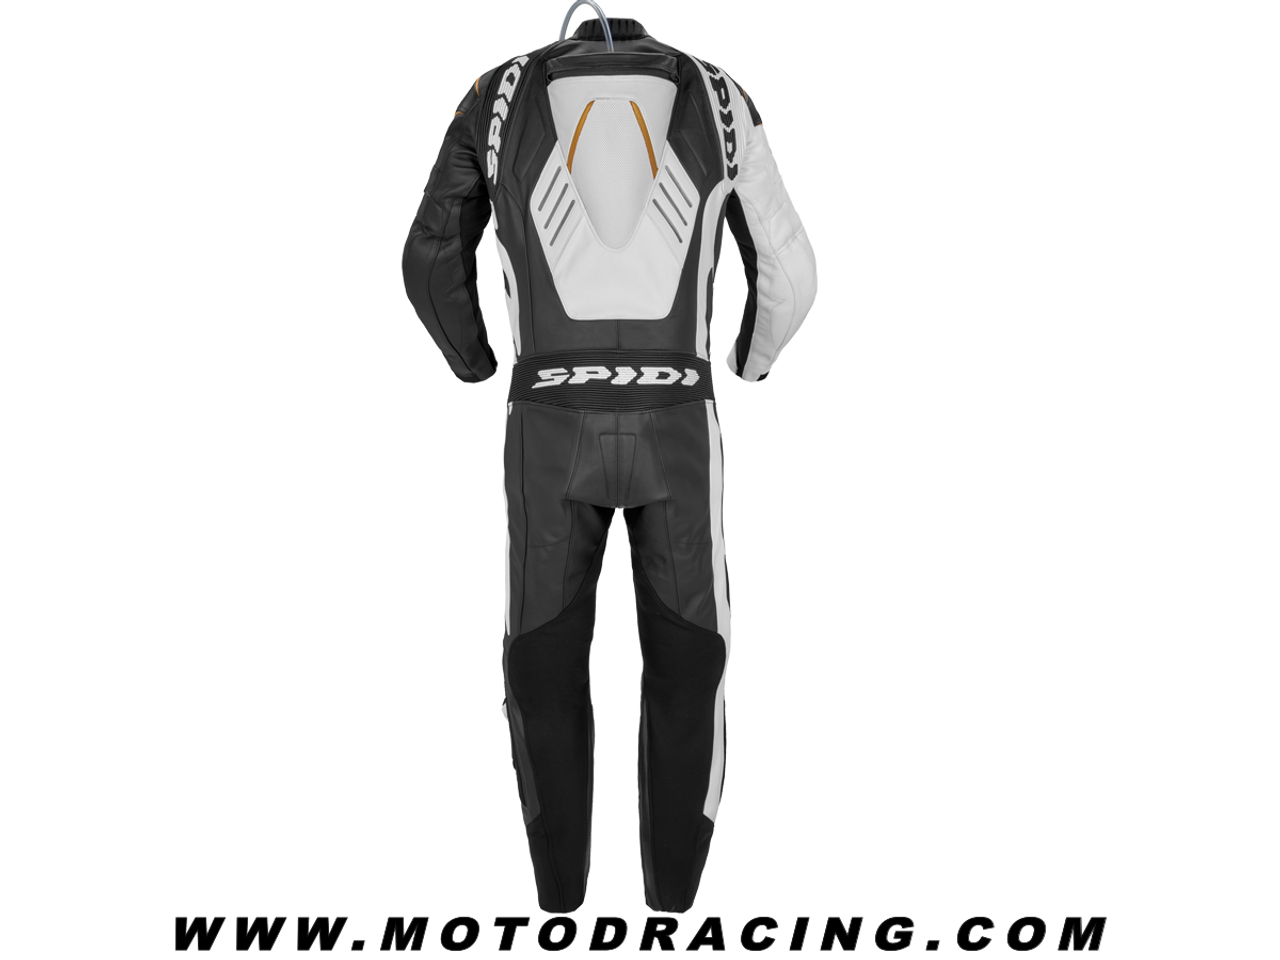 Spidi Track Wind Pro Racing Suit motorcycle leathers review